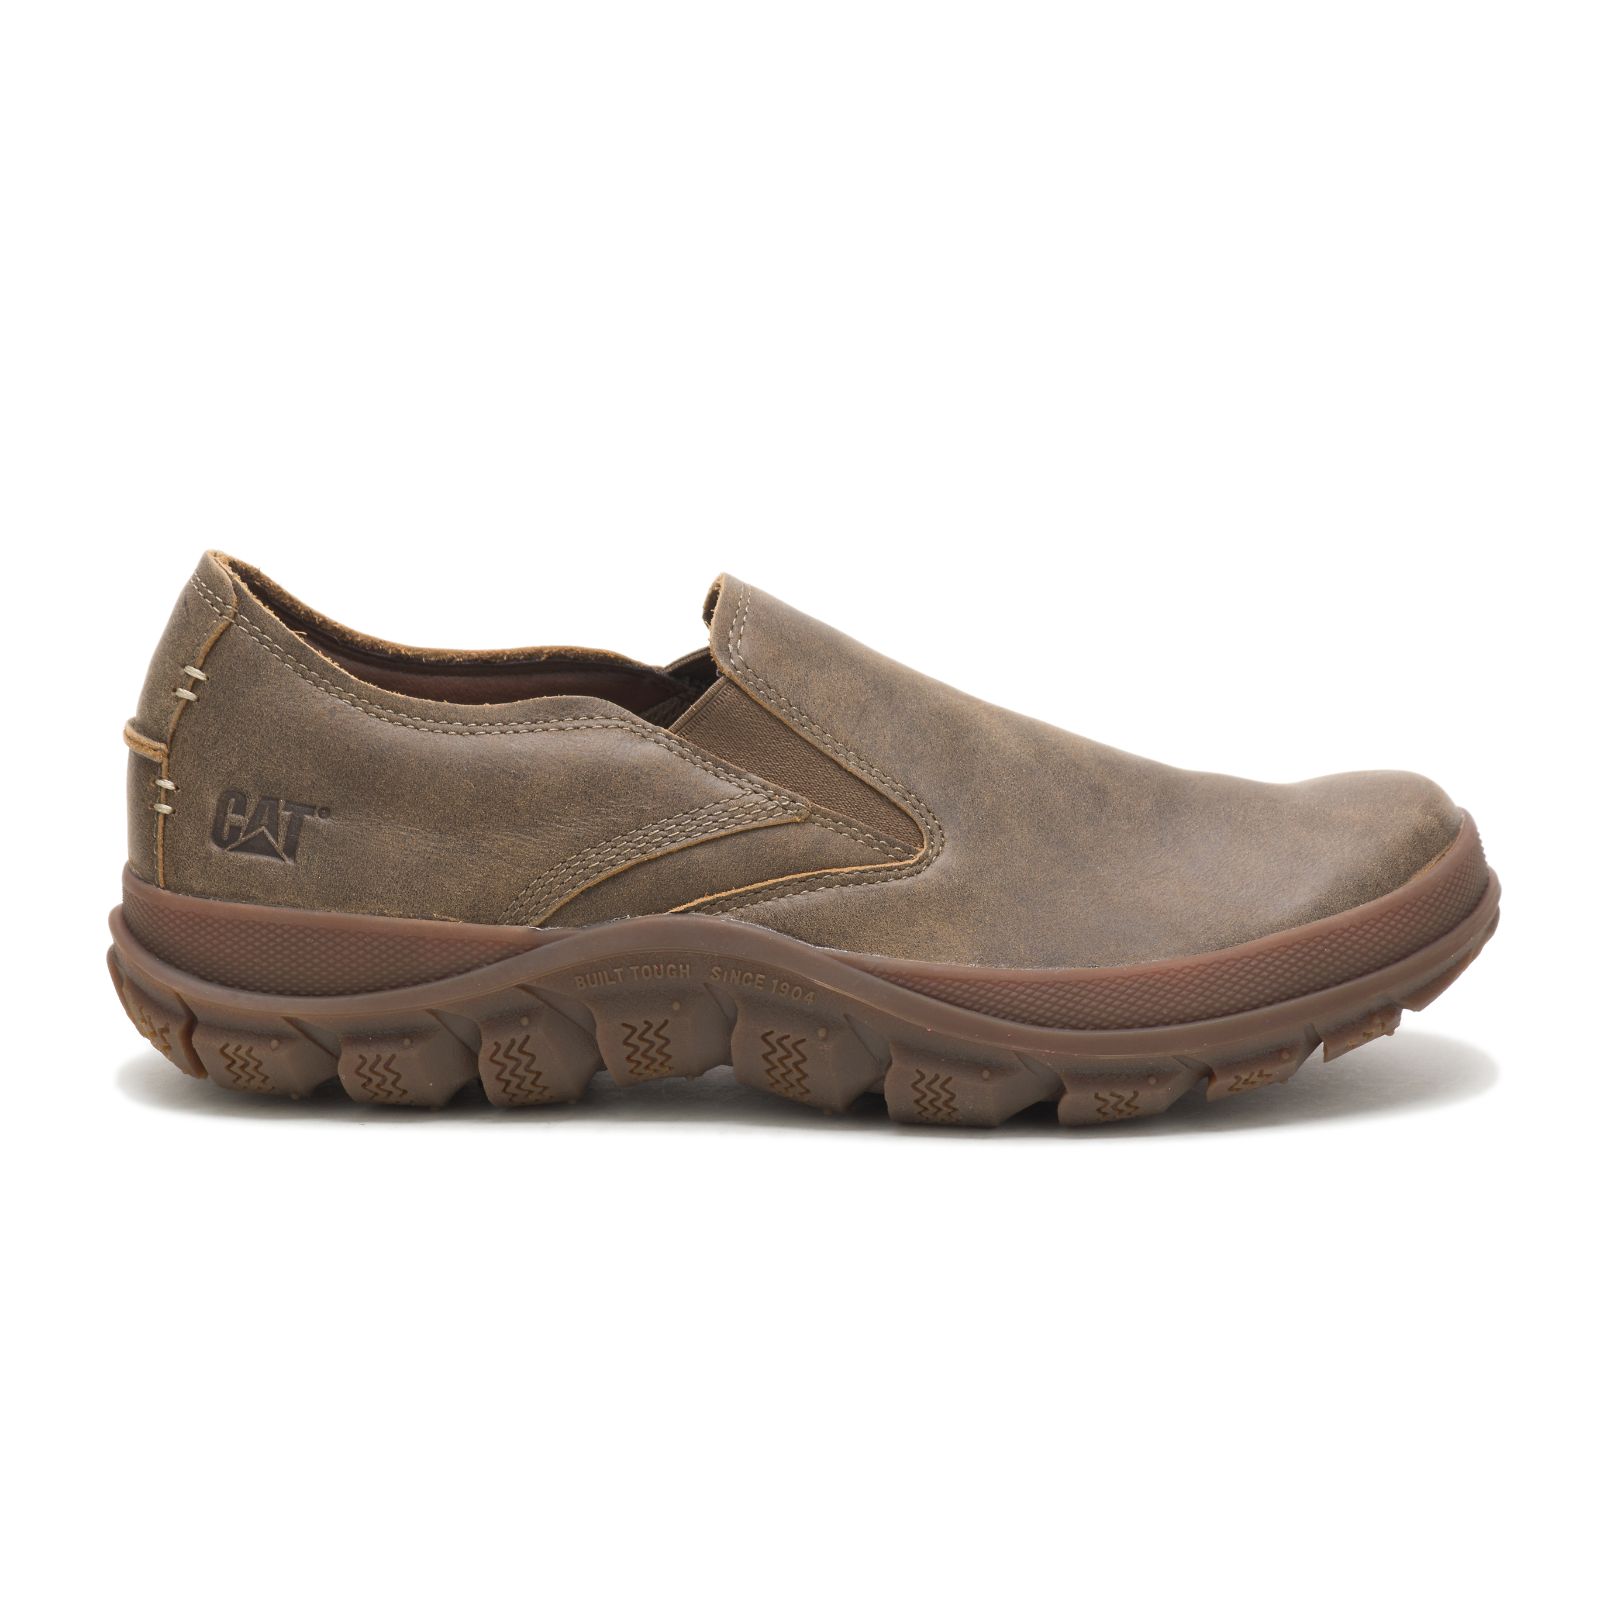 Caterpillar Fused Philippines - Mens Trainers - Brown 62145LKWC